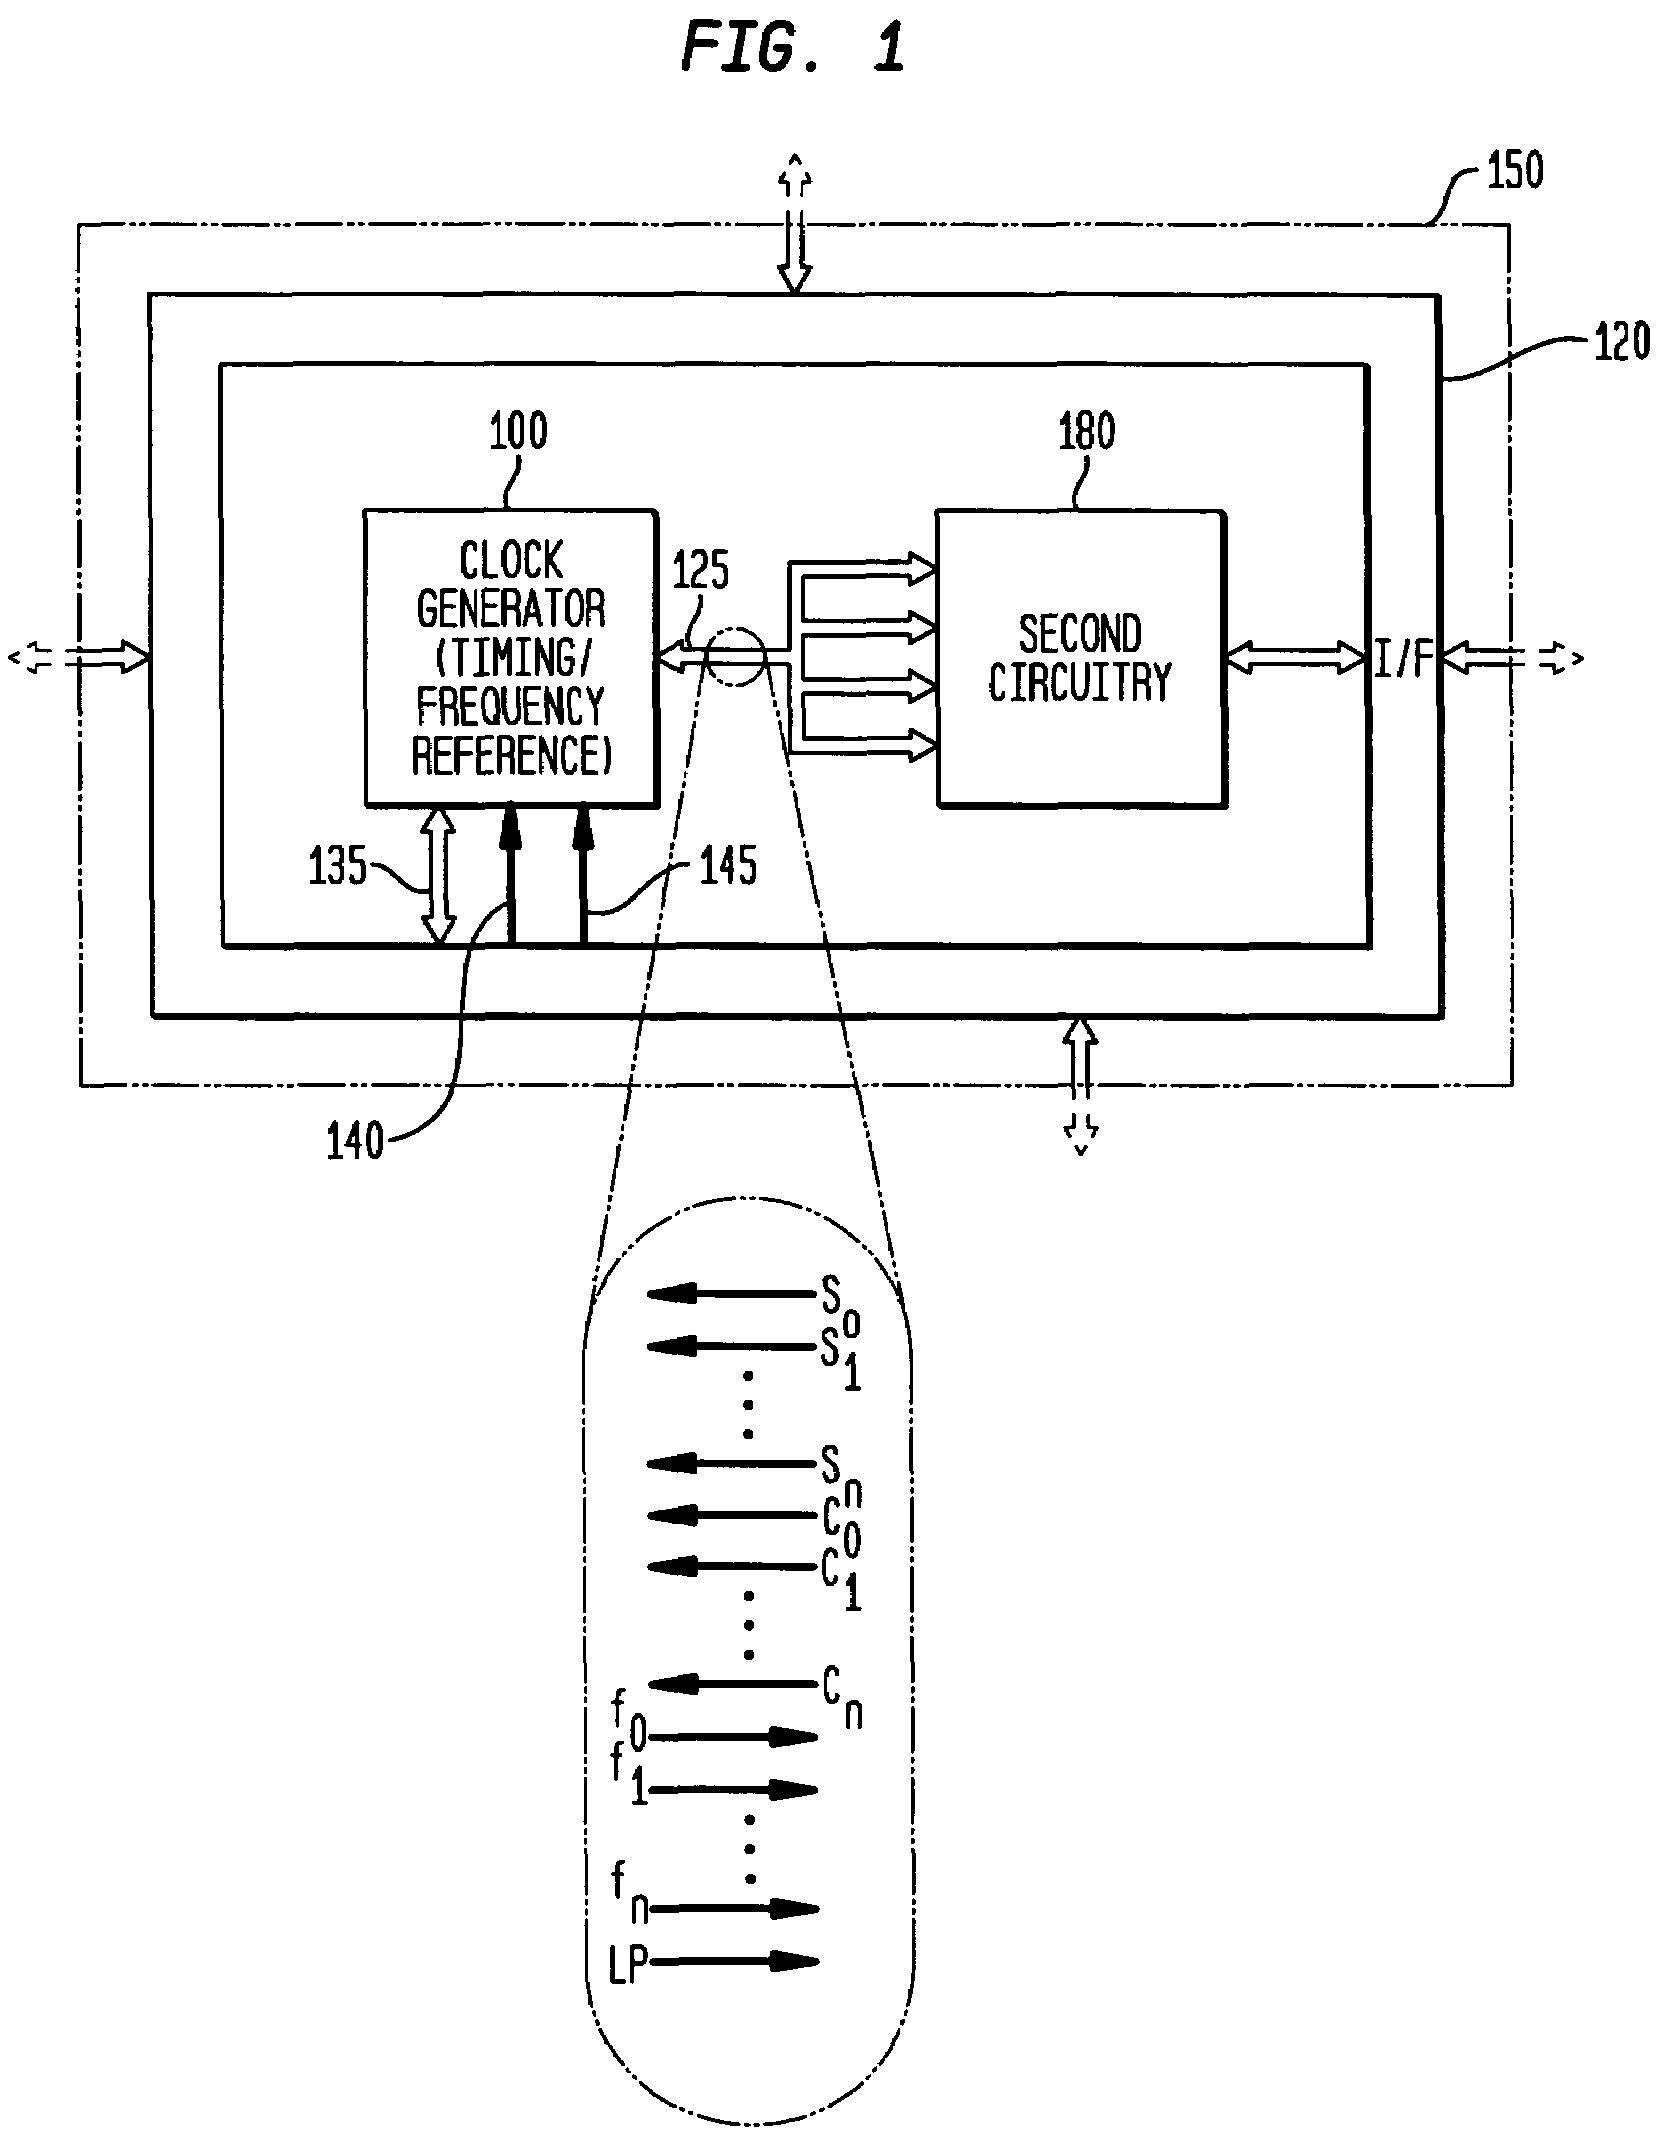 Frequency controller for a monolithic clock generator and timing/frequency reference